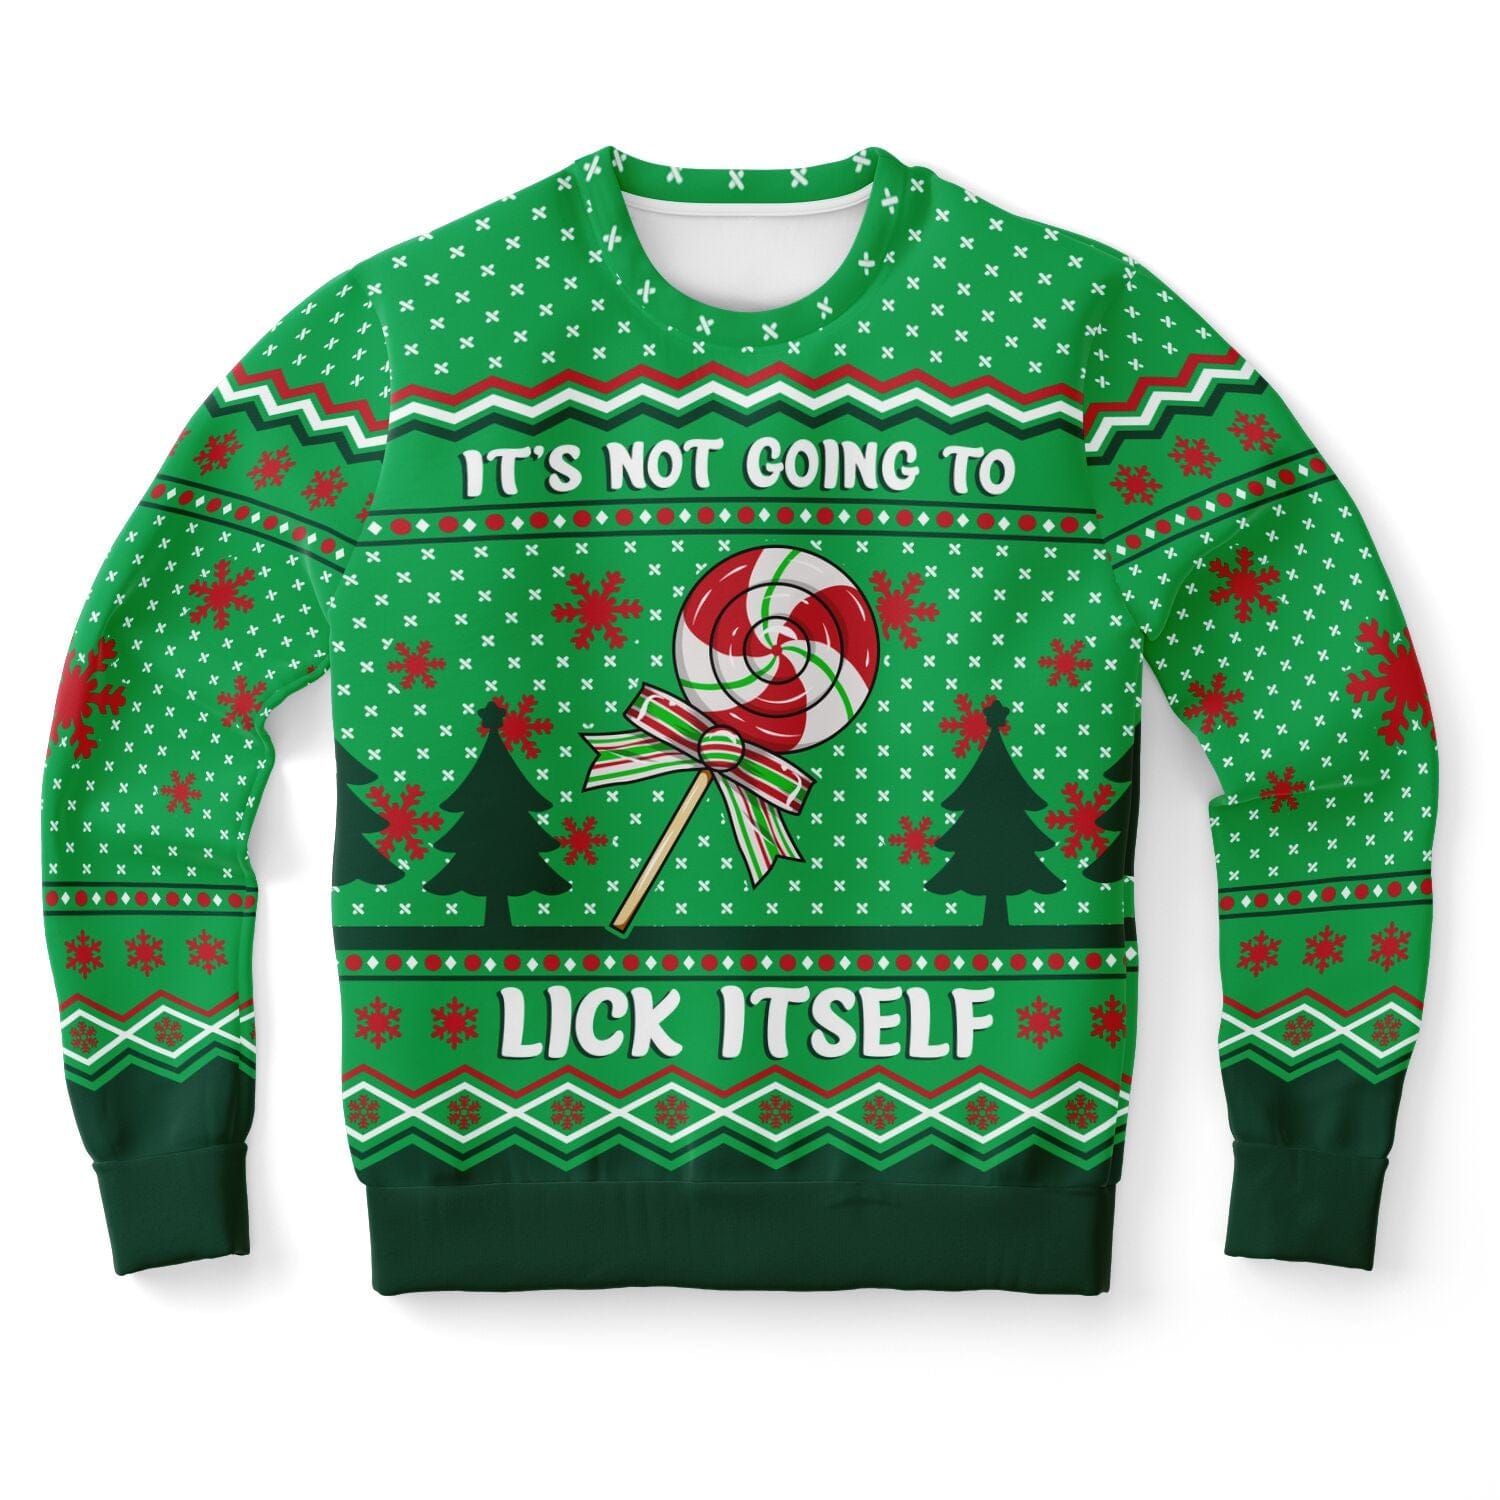 It's Not Going to Lick Itself - Funny Offensive Ugly Christmas Sweater XS